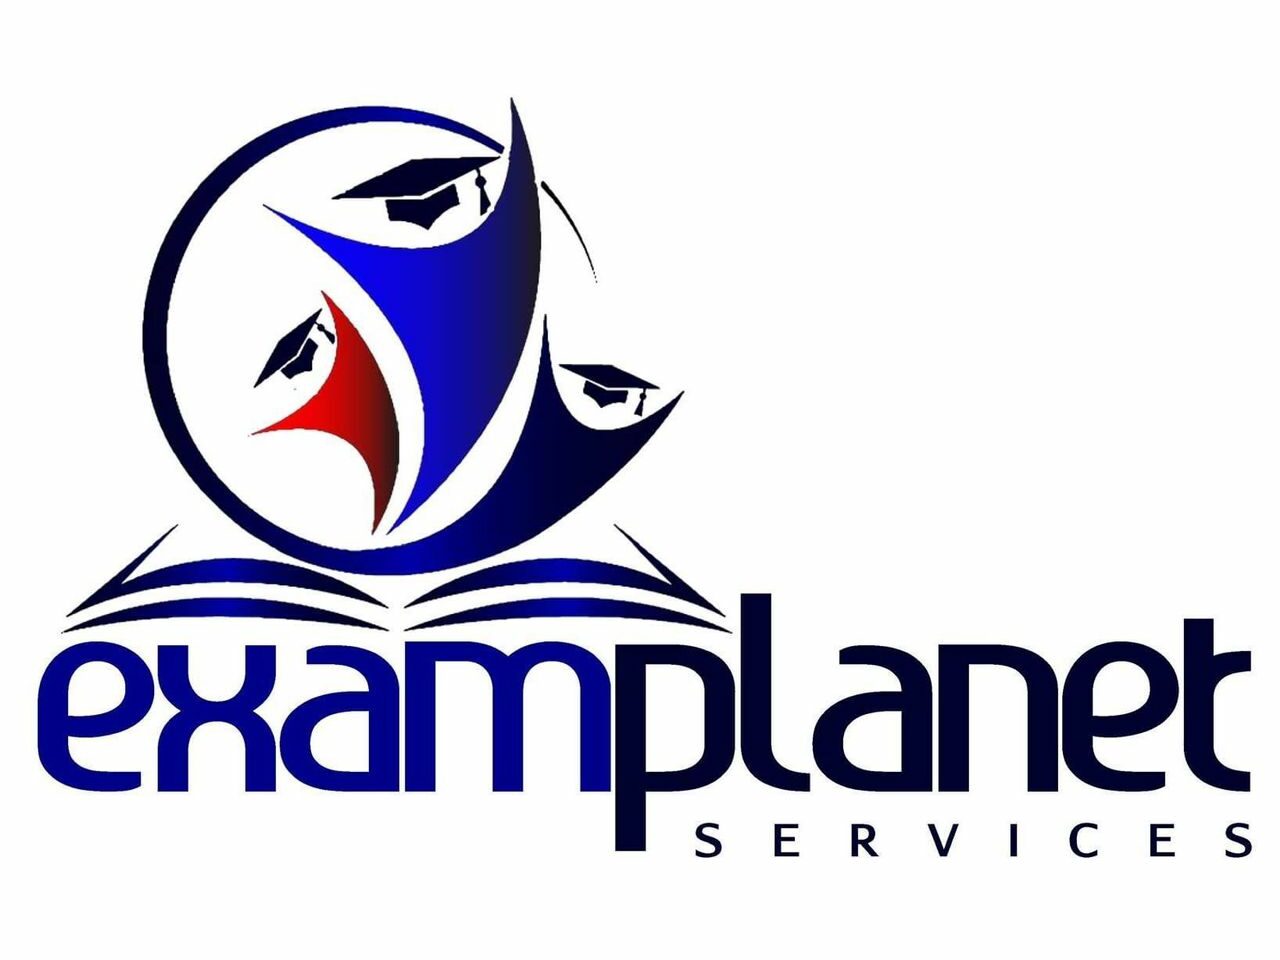 After FIJ's Story, Exam Planet Success Refunds Part of Client's N115,000 Held for Months